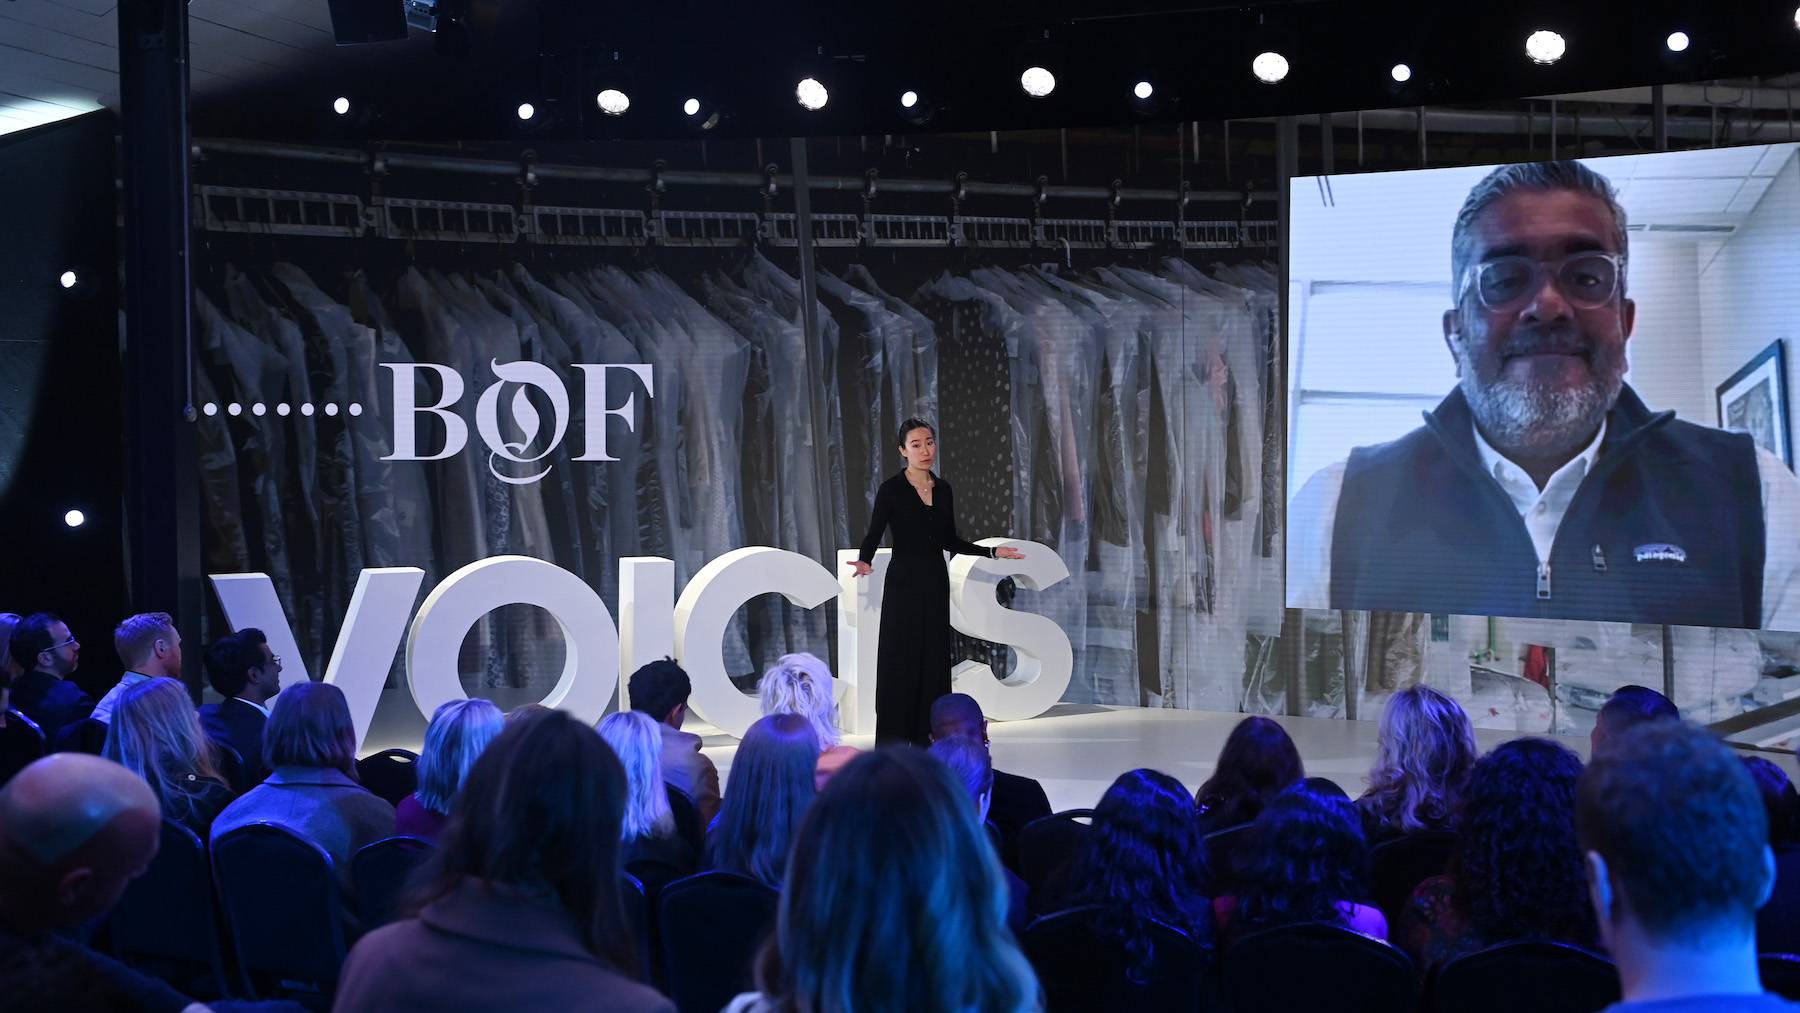 Sriram Krishnasamy, president and CEO of FedEx Dataworks, discusses how retailers can bring logistics in line with brand experience and operate more responsibly at BoF VOICES 2022.